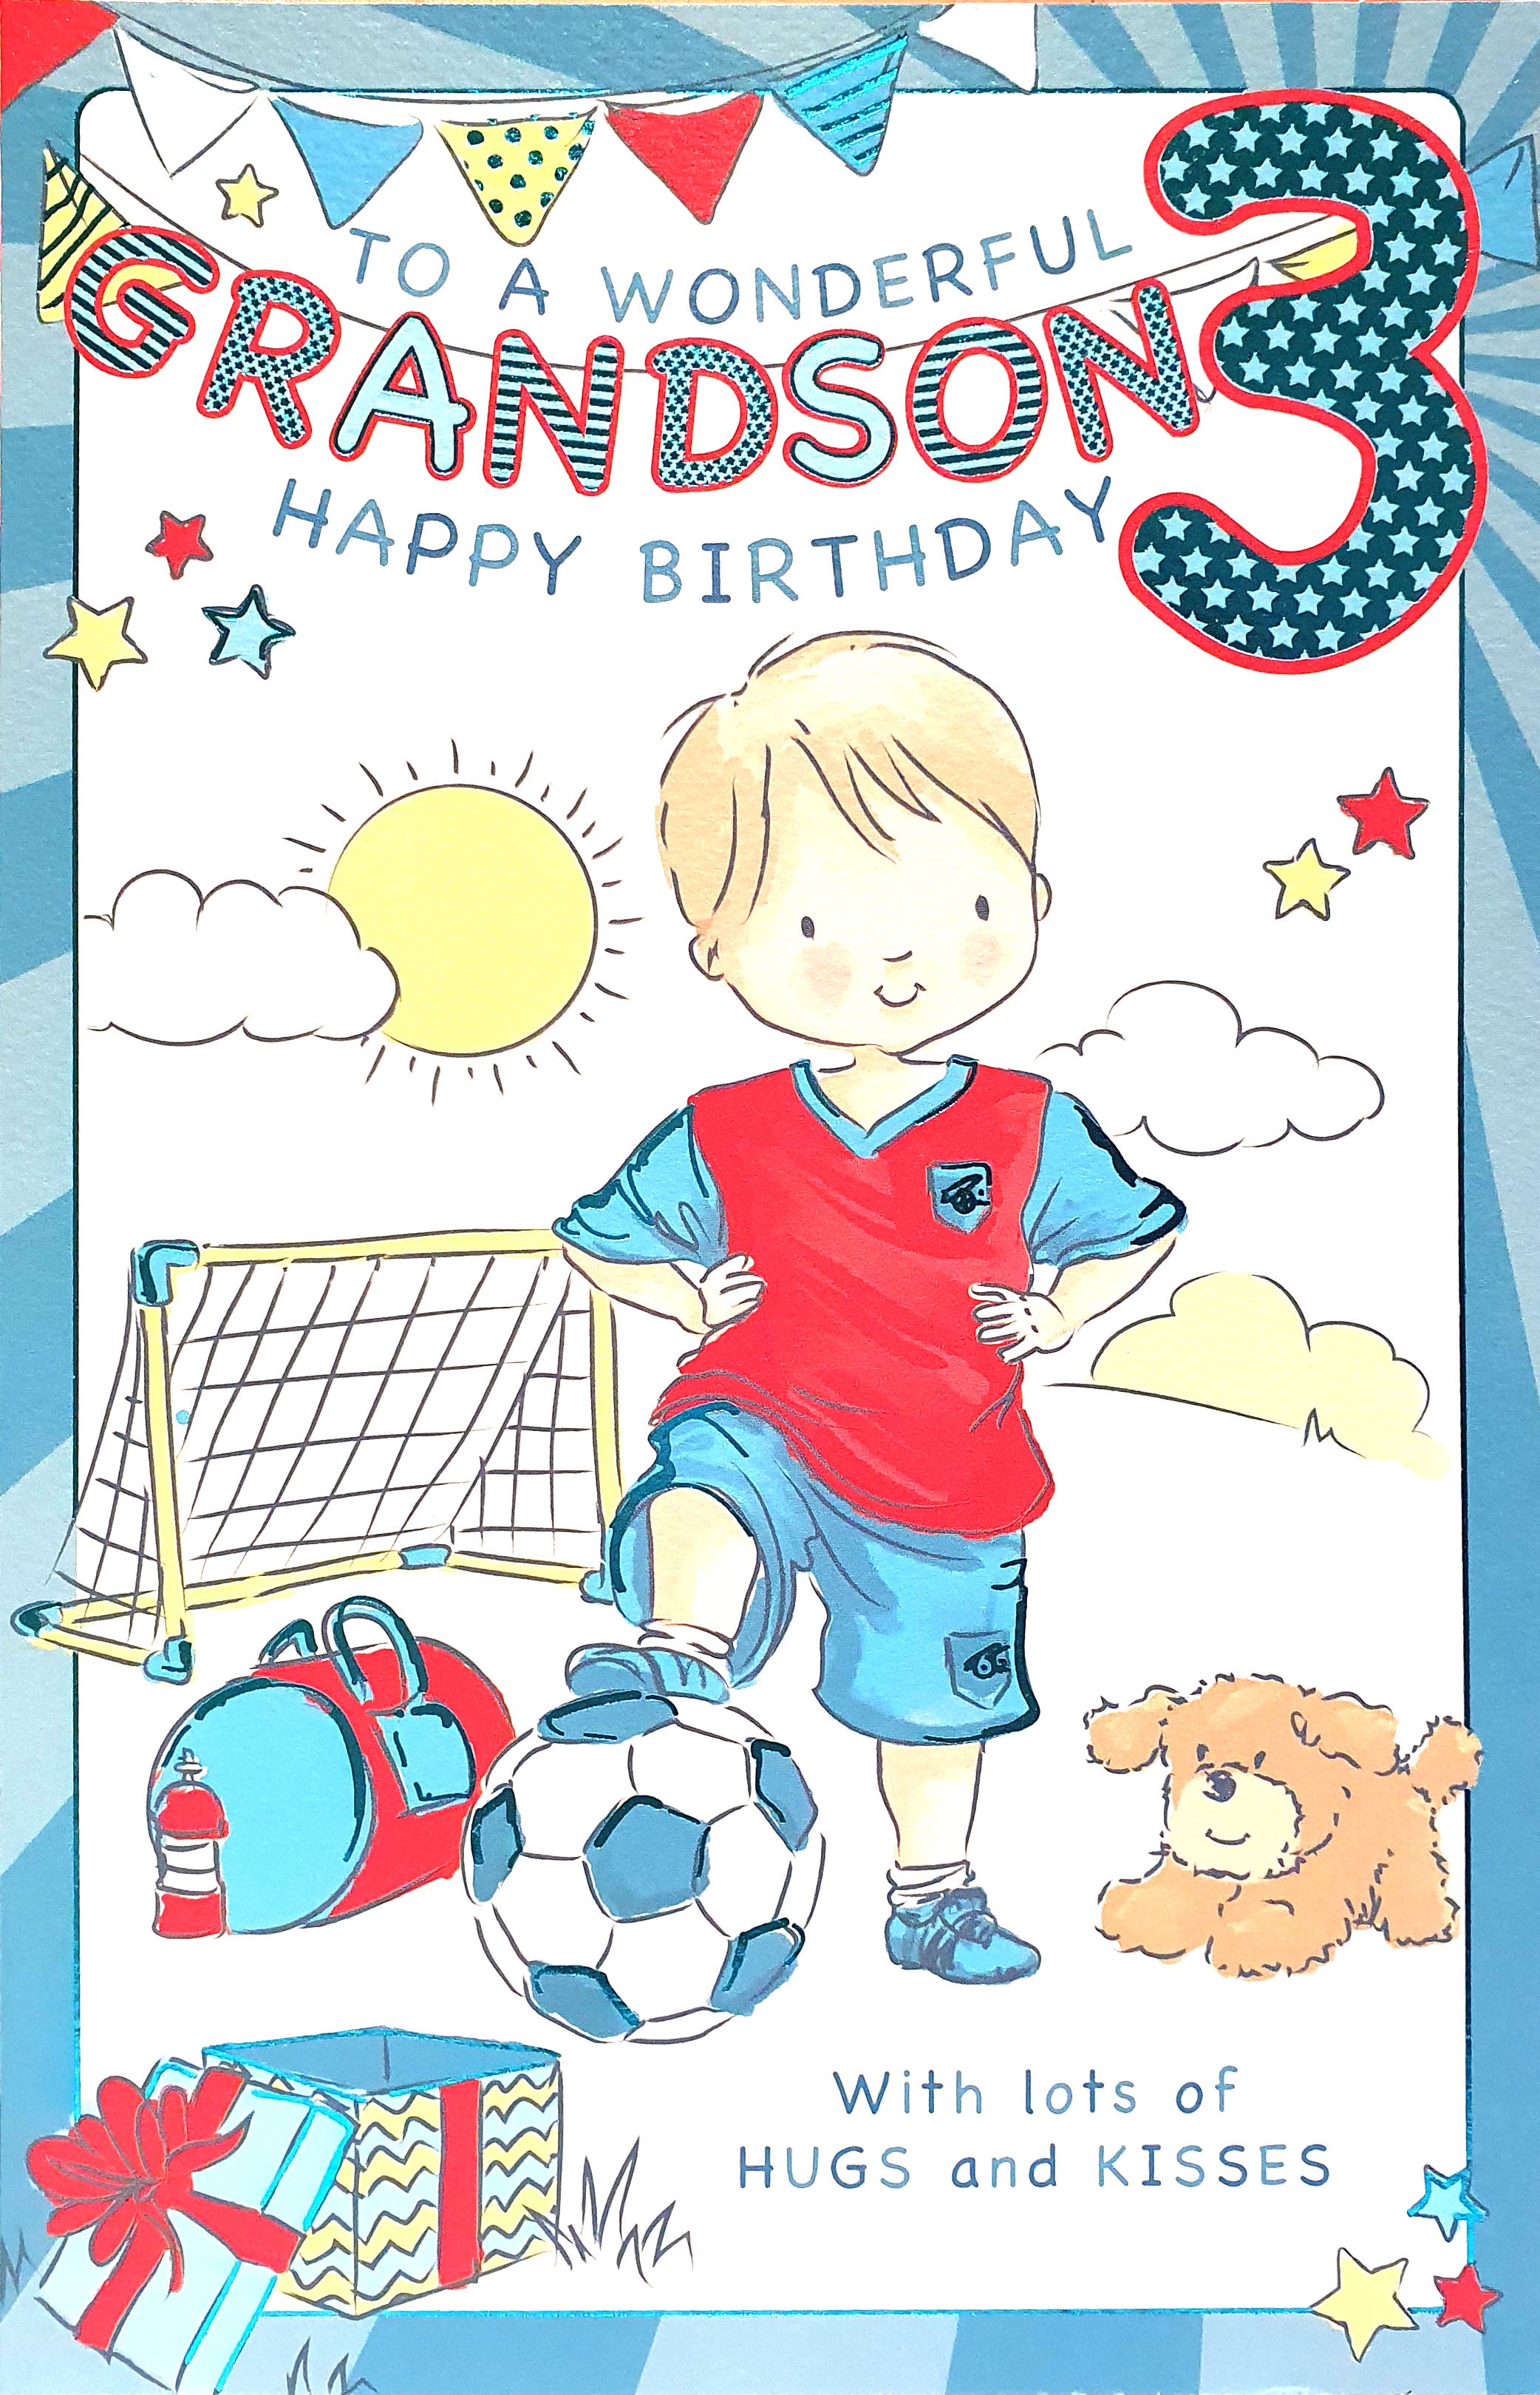 Grandson 3rd Birthday Card - Large Quality Card Colour Me In Activity Lovely